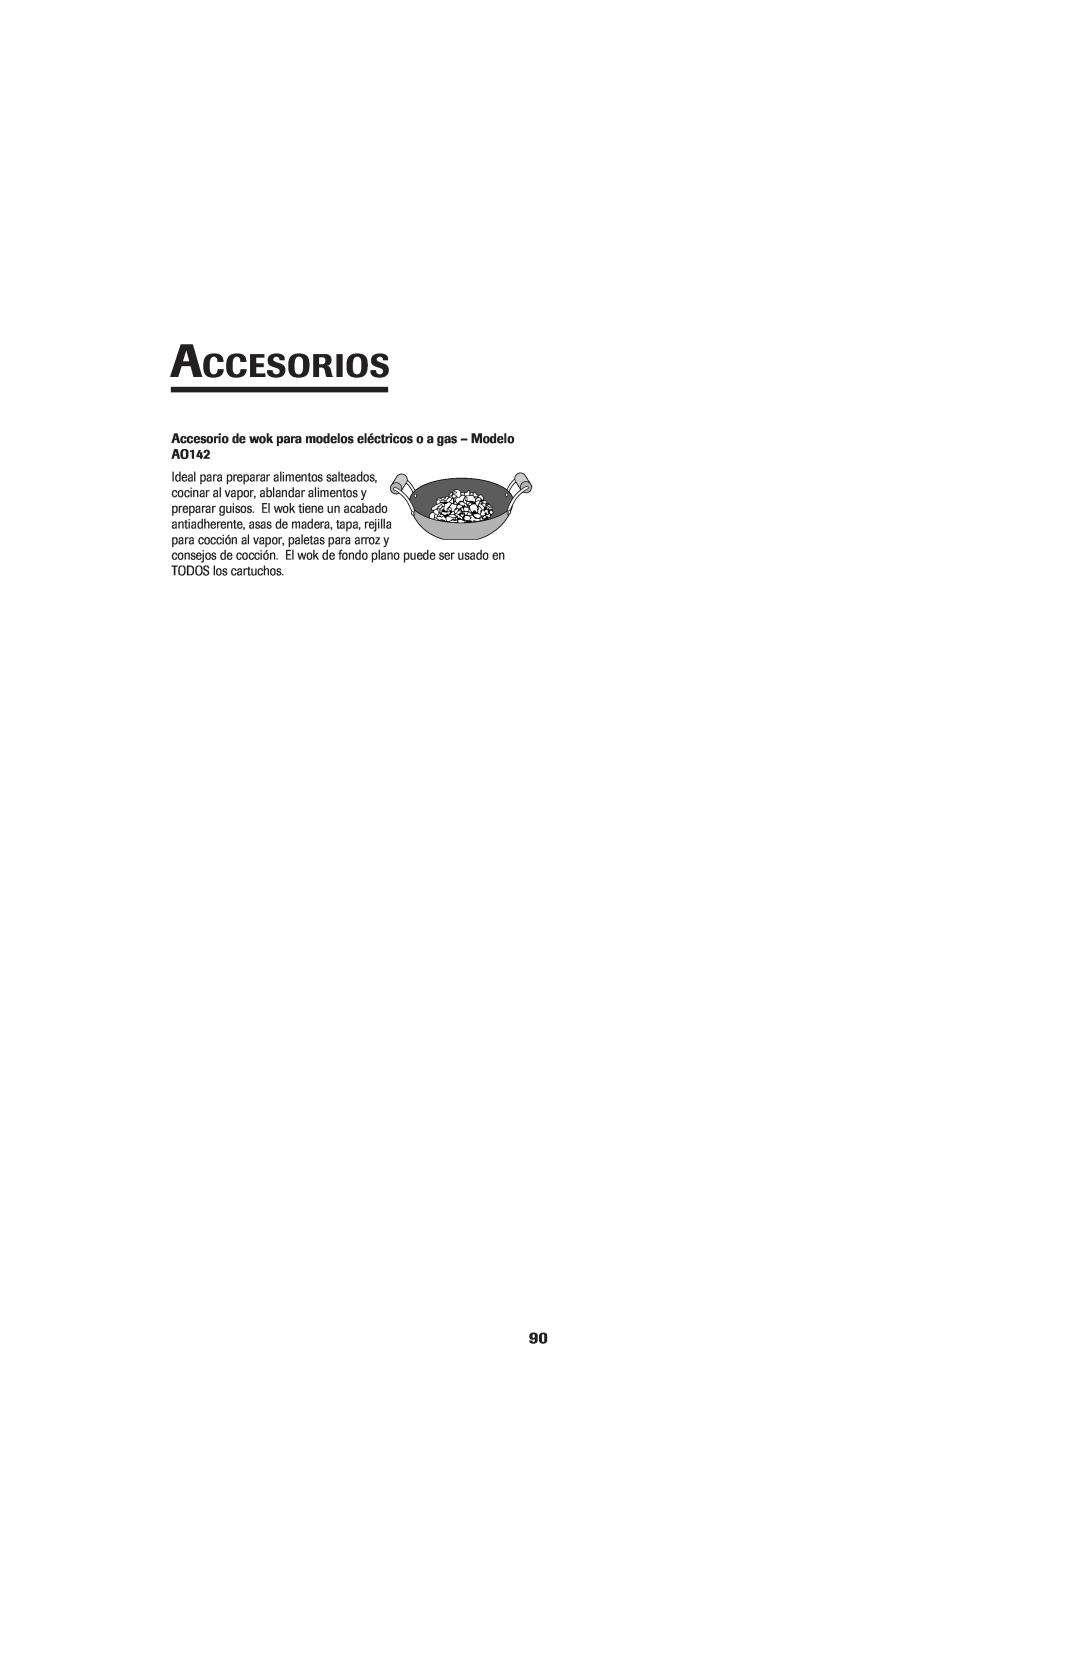 Jenn-Air 8113P759-60 important safety instructions Accesorios 